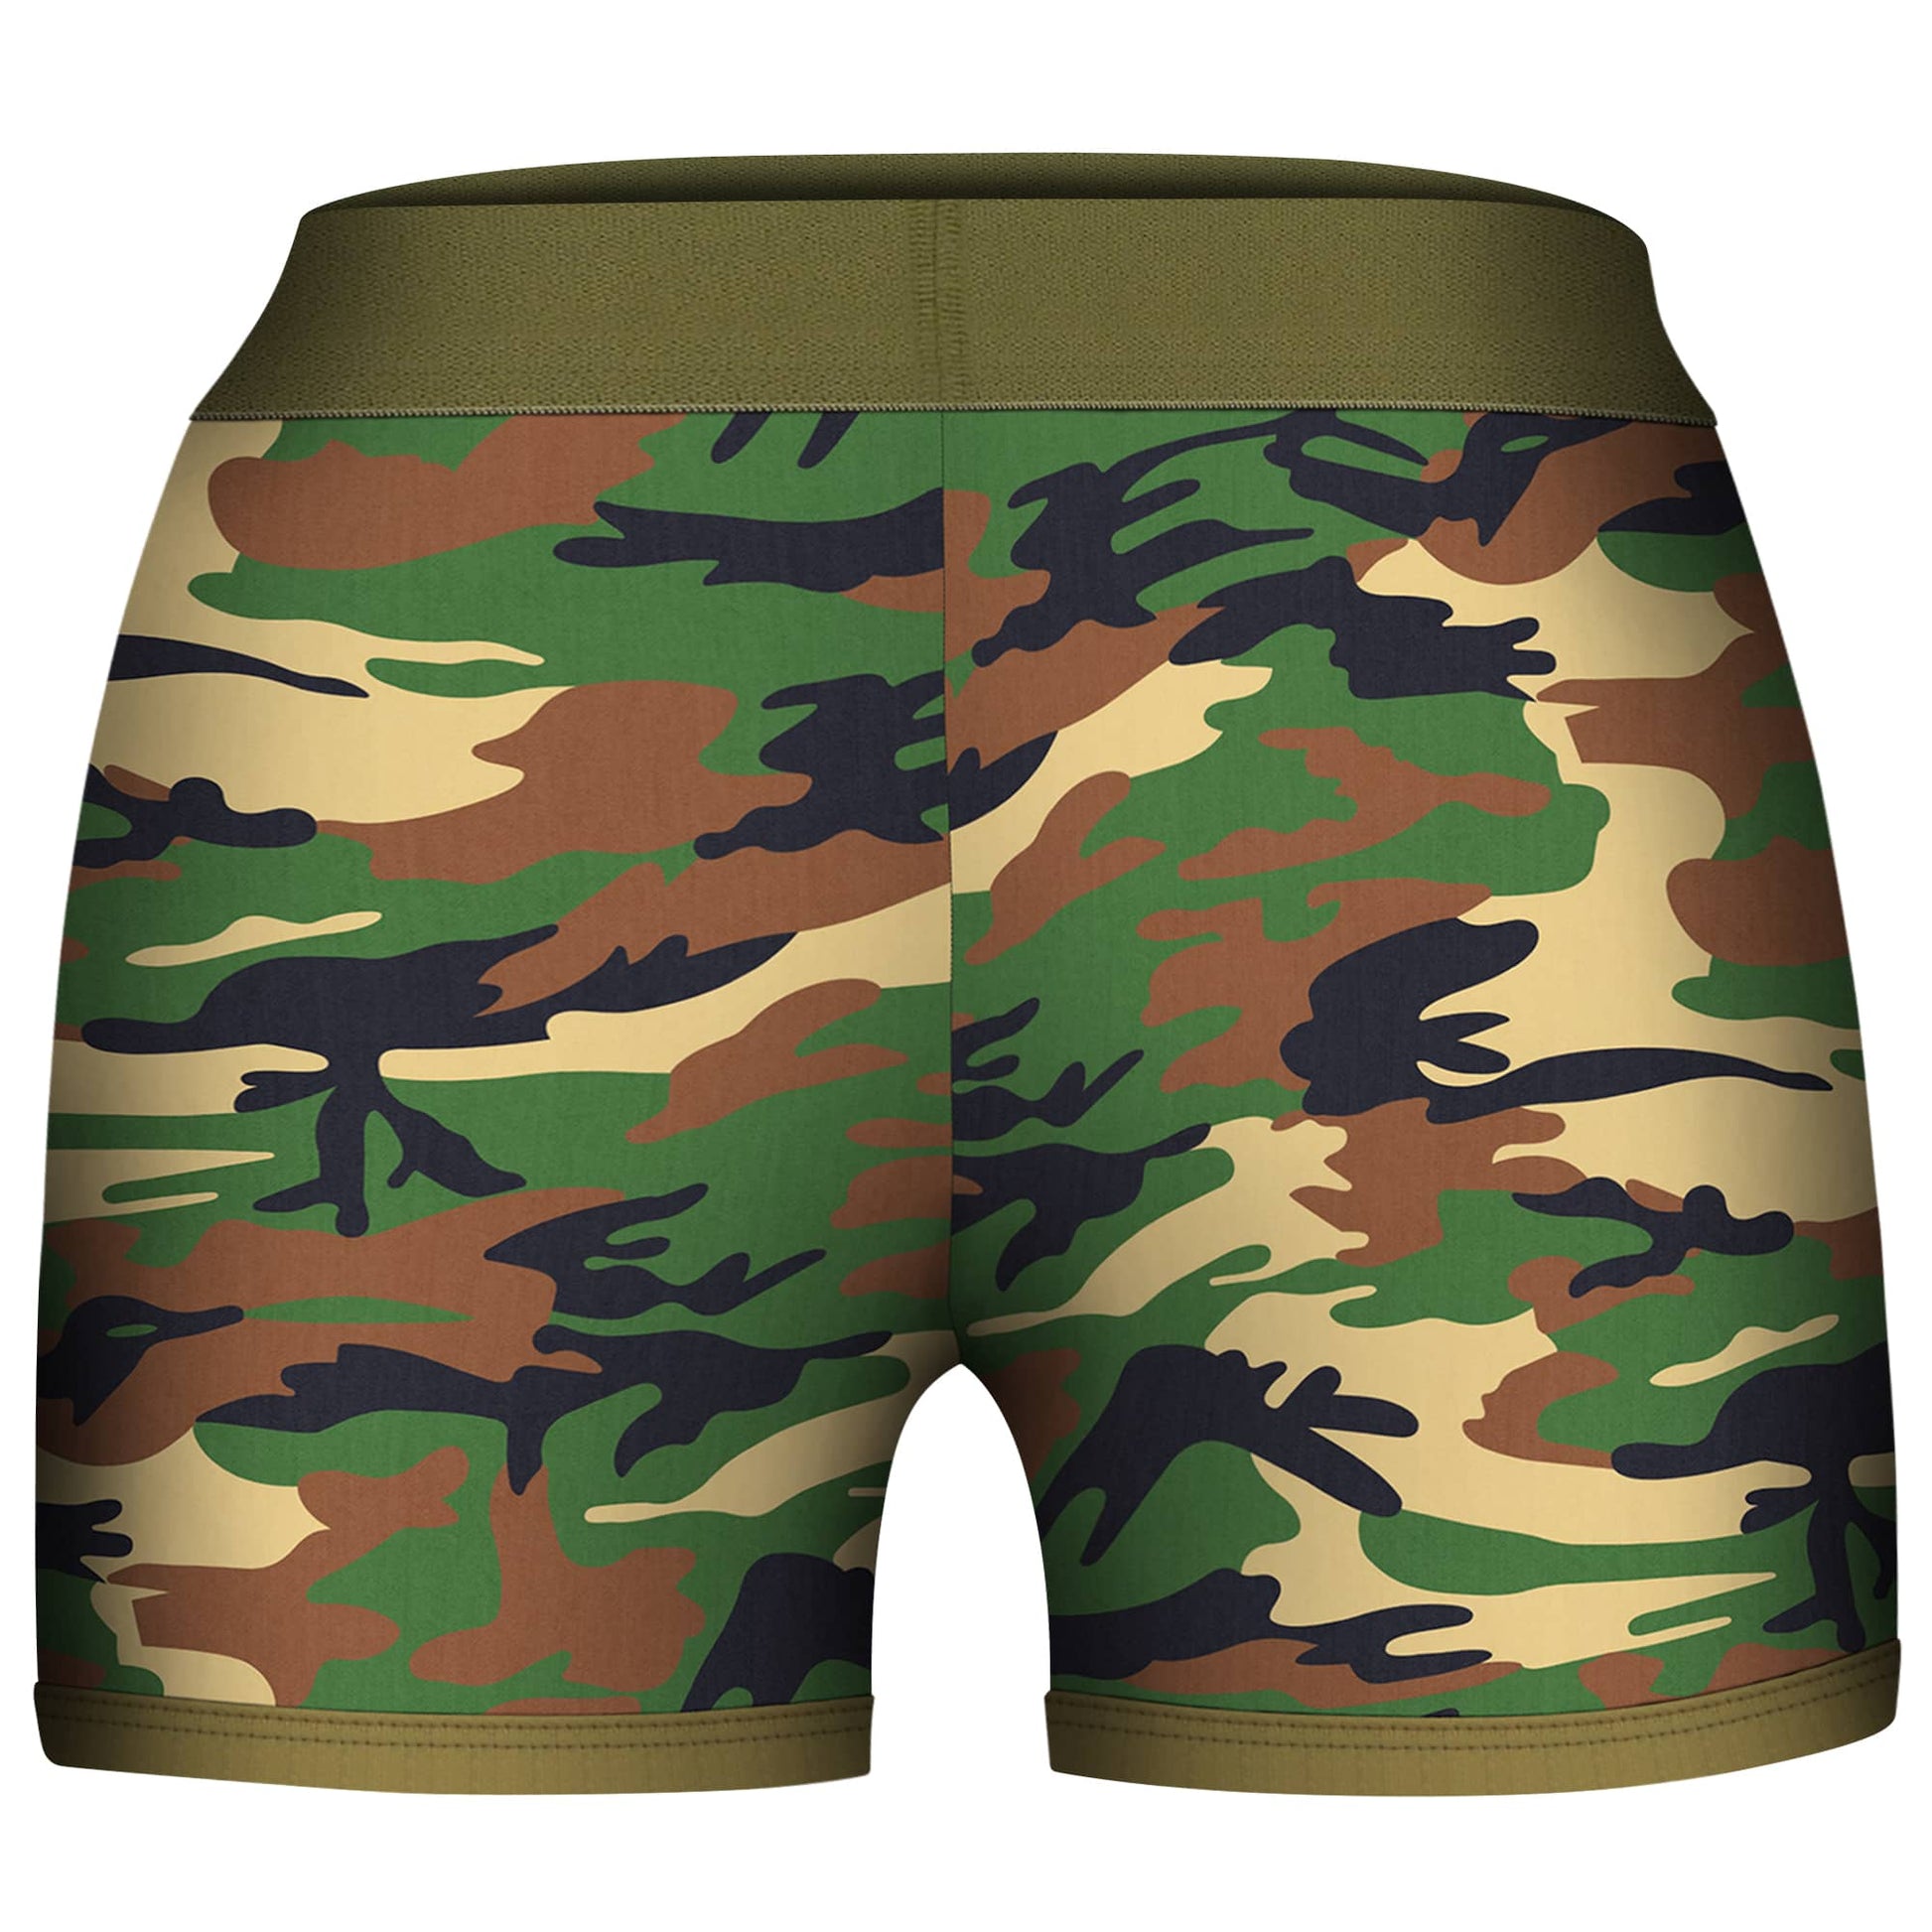 The back of the camo strap on harness shorts